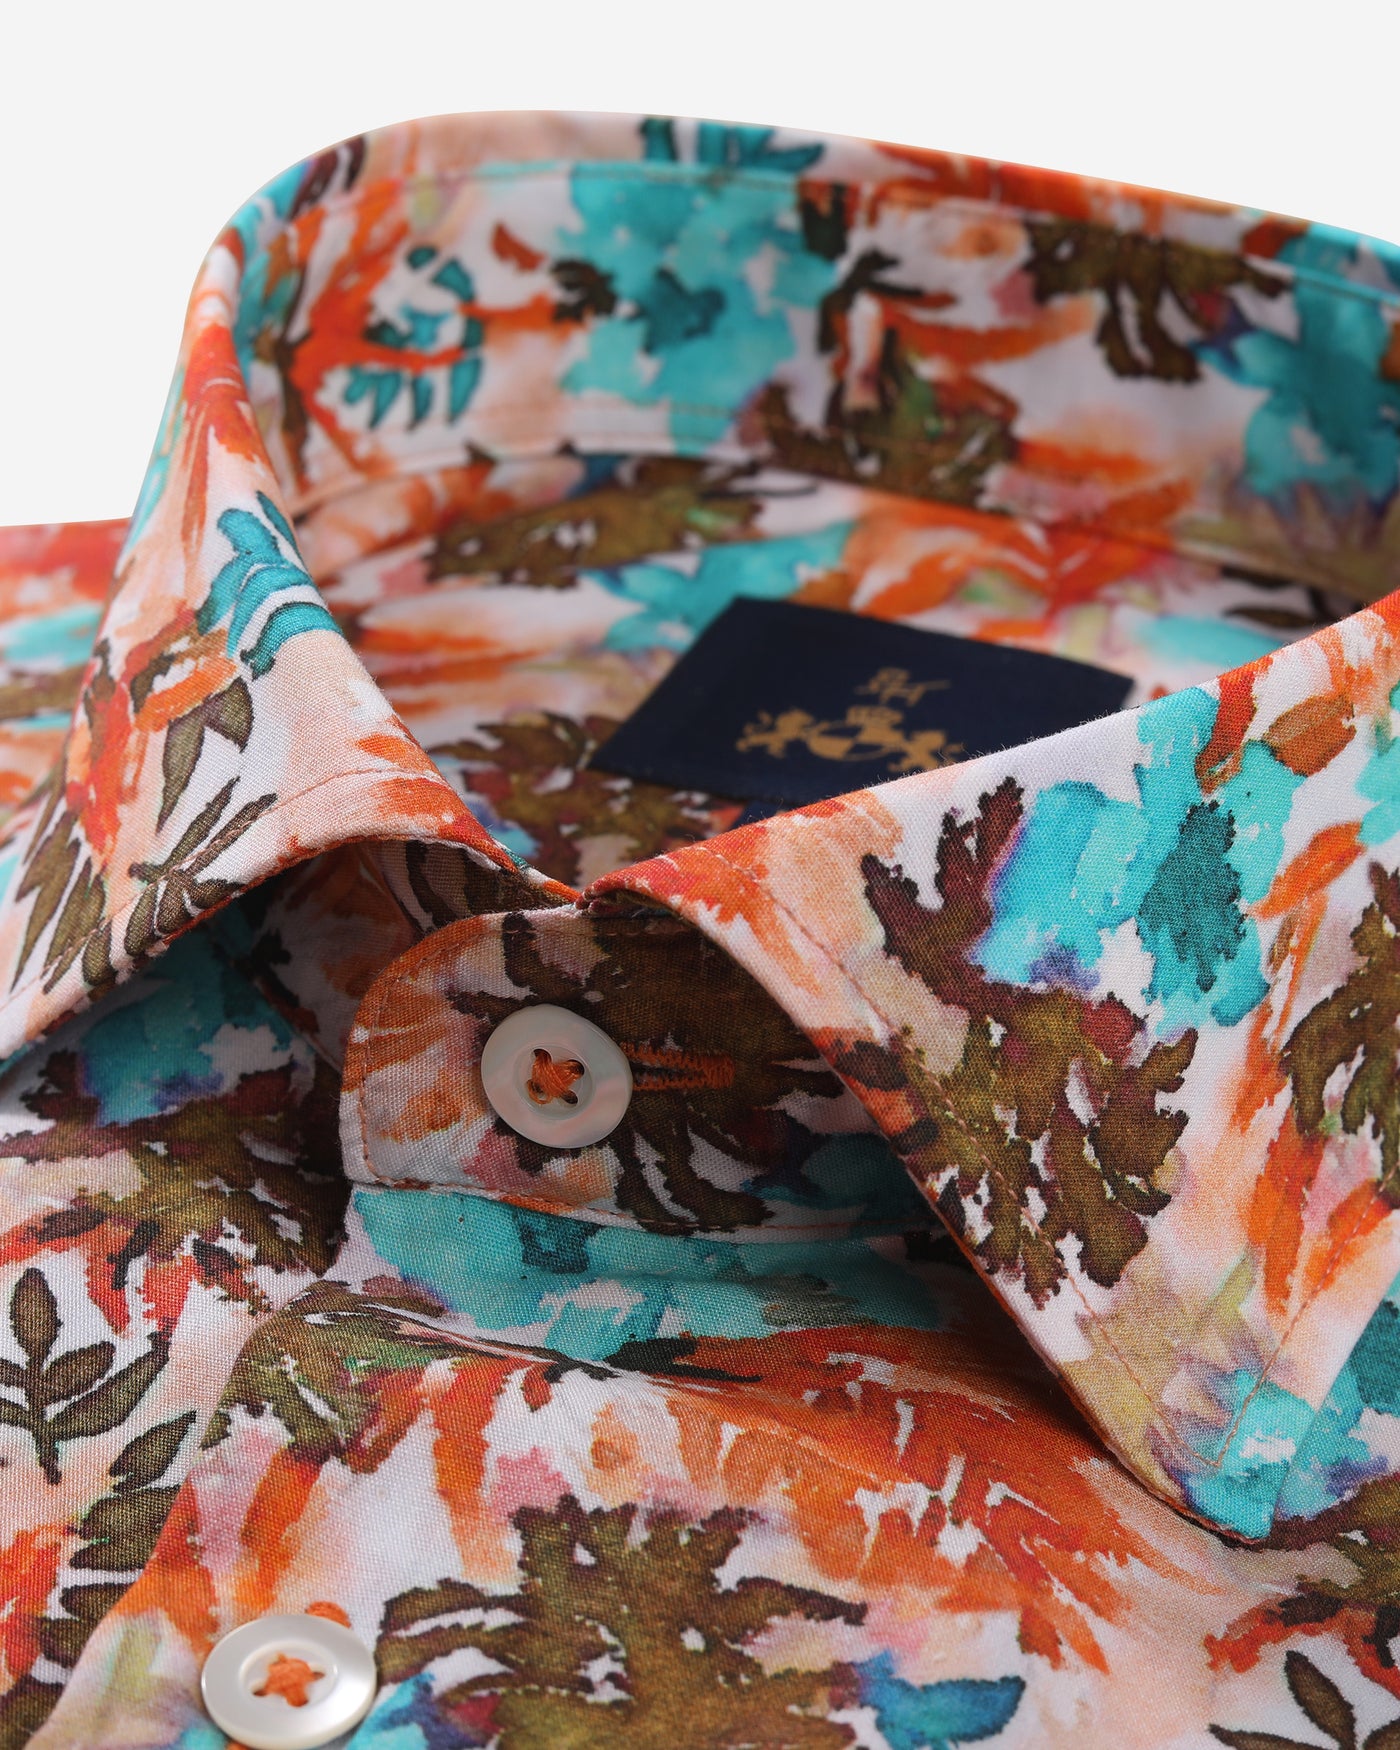 Colorful Floral Poplin Shirt - Limited Edition